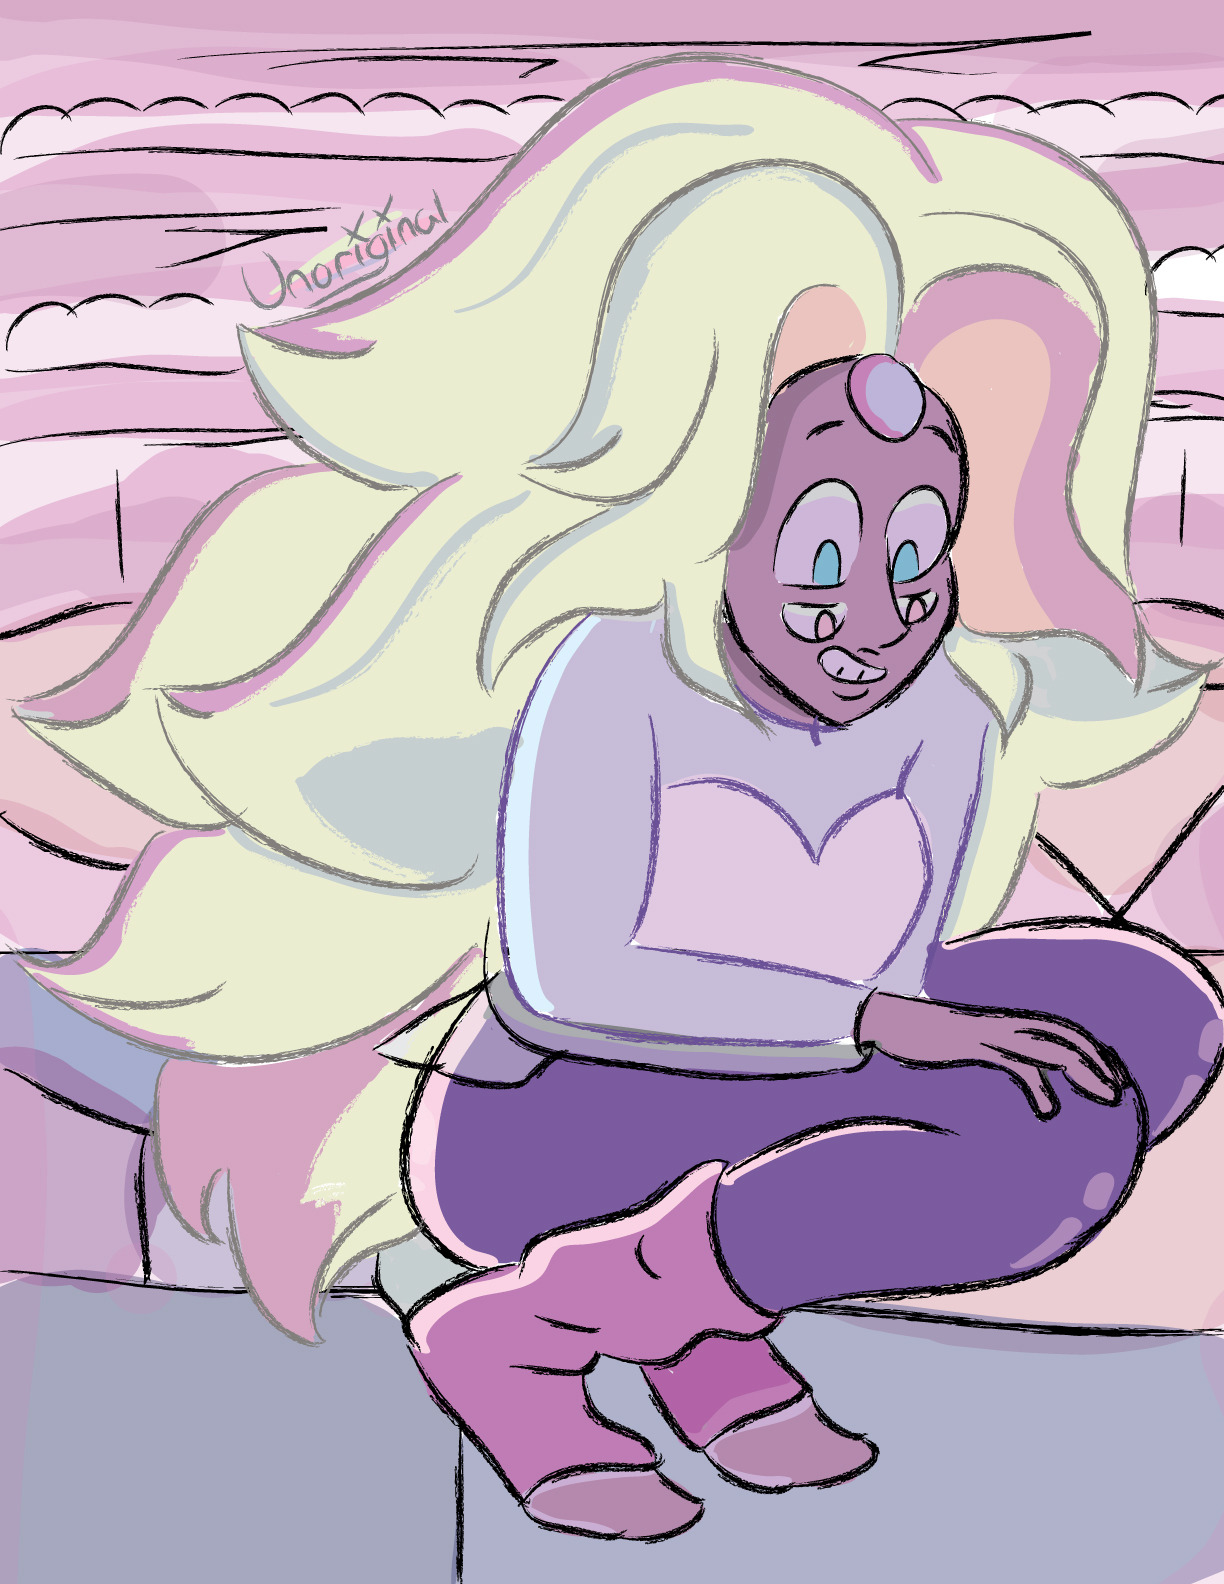 Rainbow Quartz is actually fun to color because of how many colors she has, and that